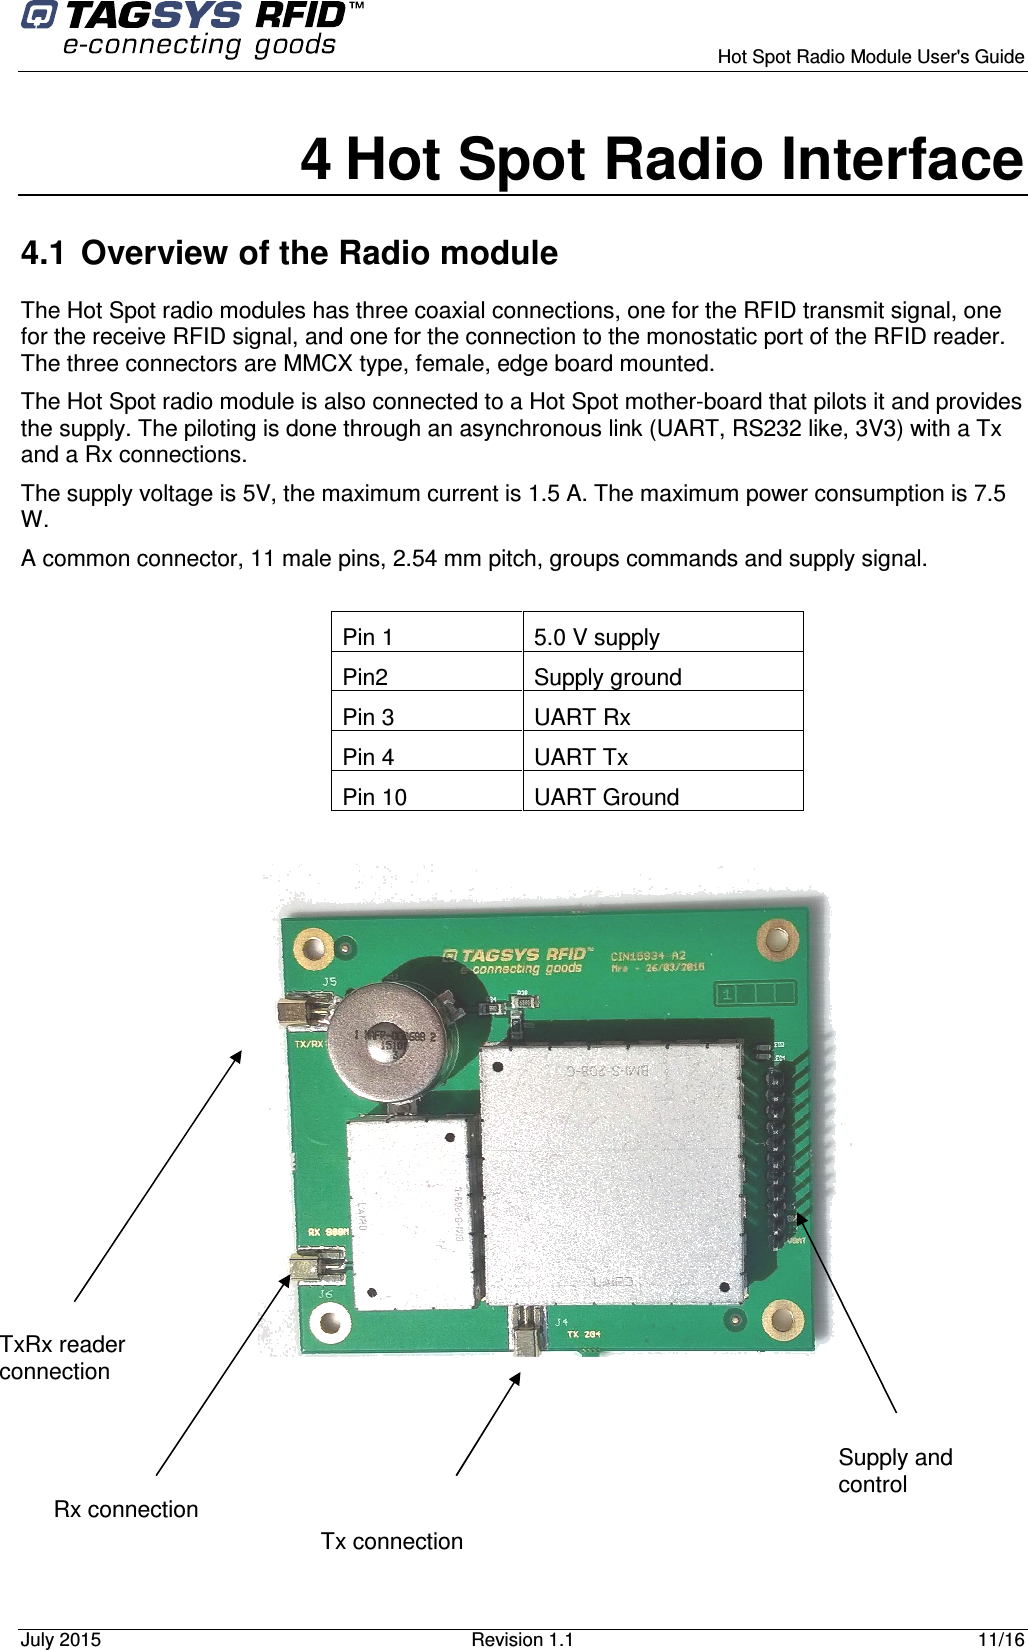      Hot Spot Radio Module User&apos;s Guide July 2015  Revision 1.1  11/16  4 Hot Spot Radio Interface 4.1  Overview of the Radio module The Hot Spot radio modules has three coaxial connections, one for the RFID transmit signal, one for the receive RFID signal, and one for the connection to the monostatic port of the RFID reader. The three connectors are MMCX type, female, edge board mounted. The Hot Spot radio module is also connected to a Hot Spot mother-board that pilots it and provides the supply. The piloting is done through an asynchronous link (UART, RS232 like, 3V3) with a Tx and a Rx connections. The supply voltage is 5V, the maximum current is 1.5 A. The maximum power consumption is 7.5 W. A common connector, 11 male pins, 2.54 mm pitch, groups commands and supply signal.   Pin 1  5.0 V supply Pin2  Supply ground Pin 3  UART Rx Pin 4  UART Tx Pin 10  UART Ground  Tx connection  TxRx reader connection  Rx connection  Supply and control  